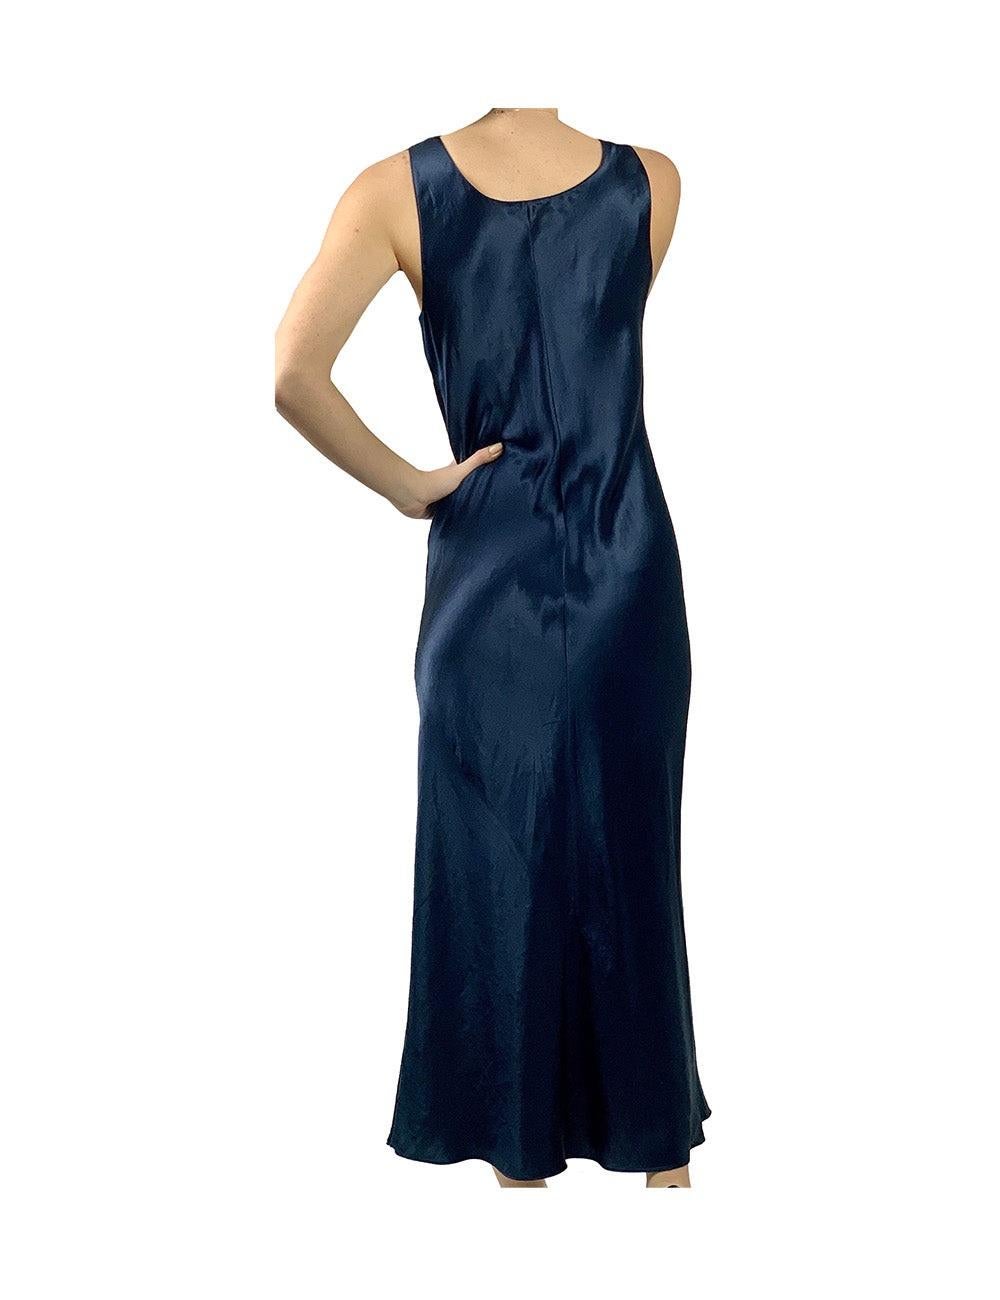 Vince Navy Satin Maxi Slip Dress. Perfect for spring and summer.

Additional information:
Features: Back Zipper
Size: Small
Overall Condition: Gently Loved